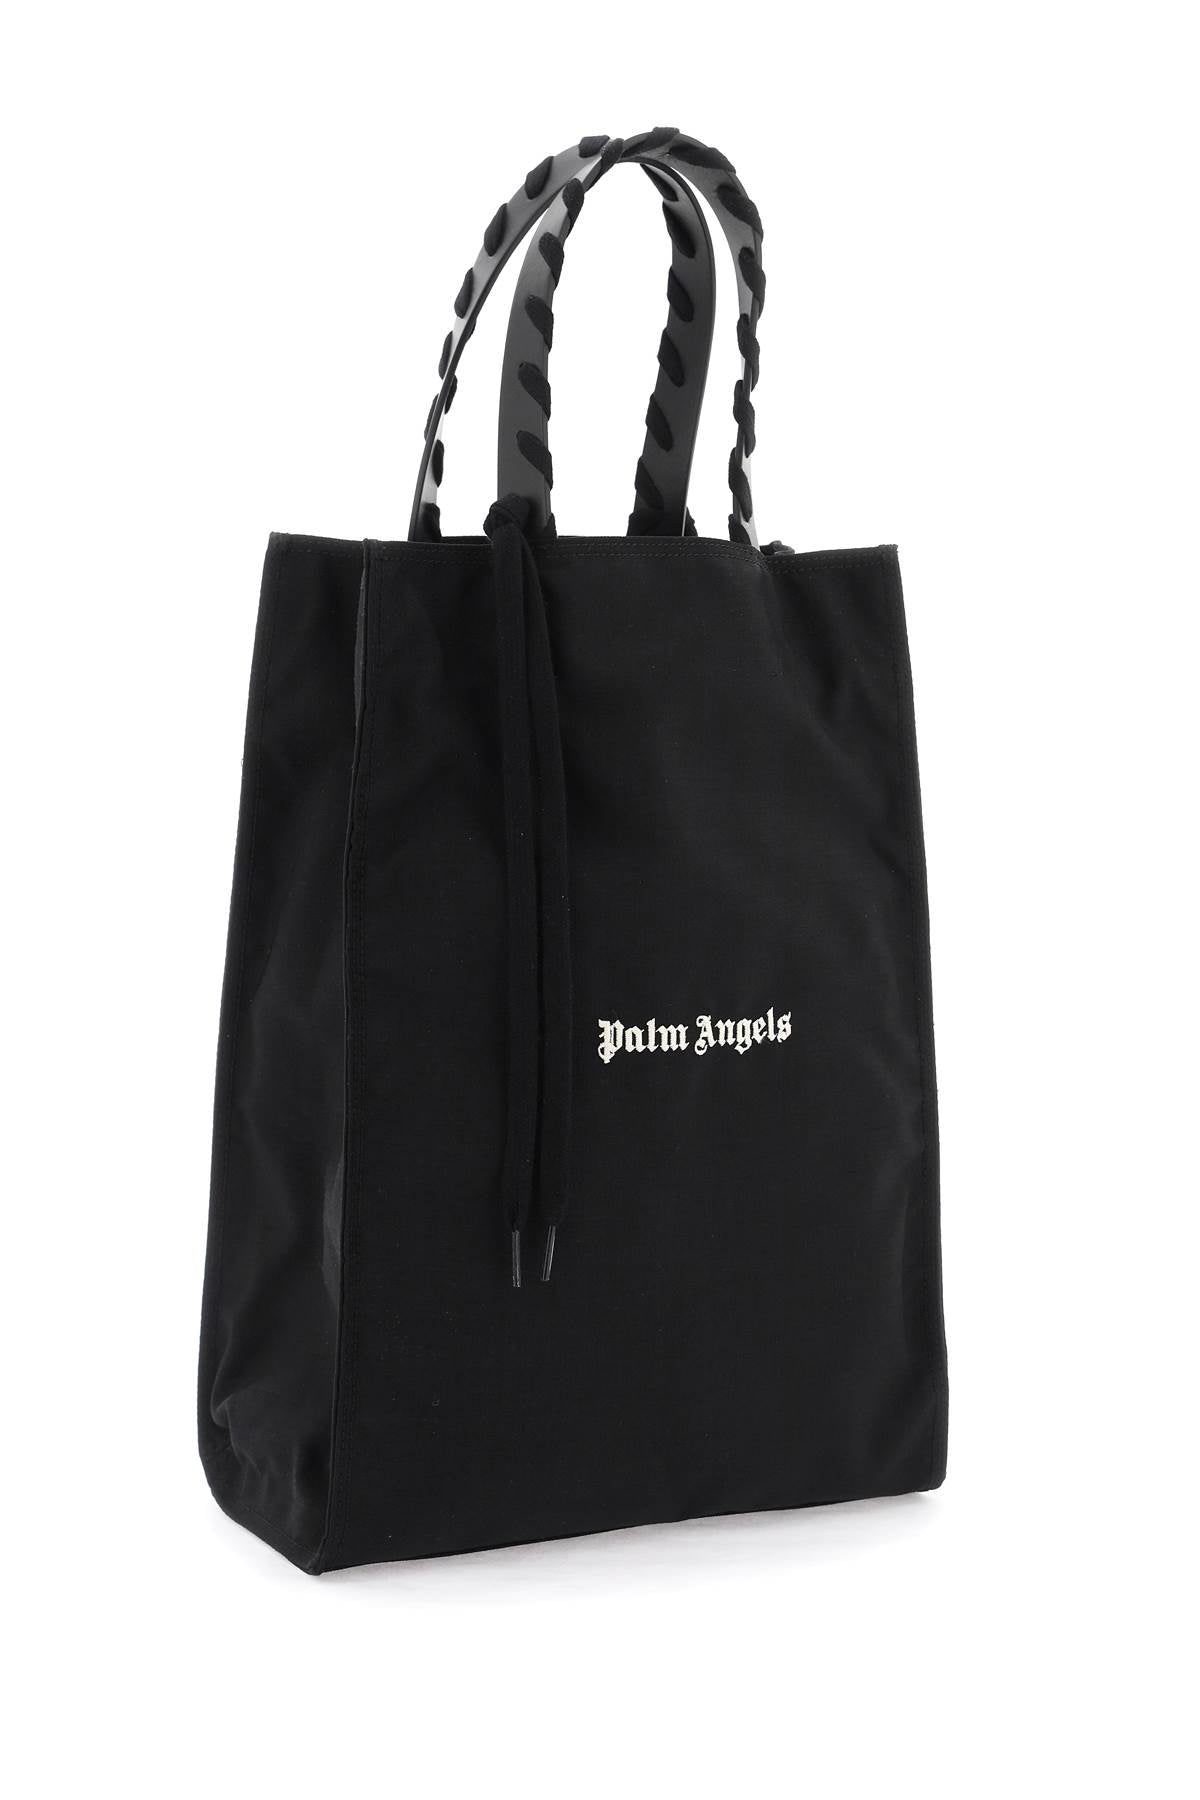 Palm angels embroidered logo tote bag with-2